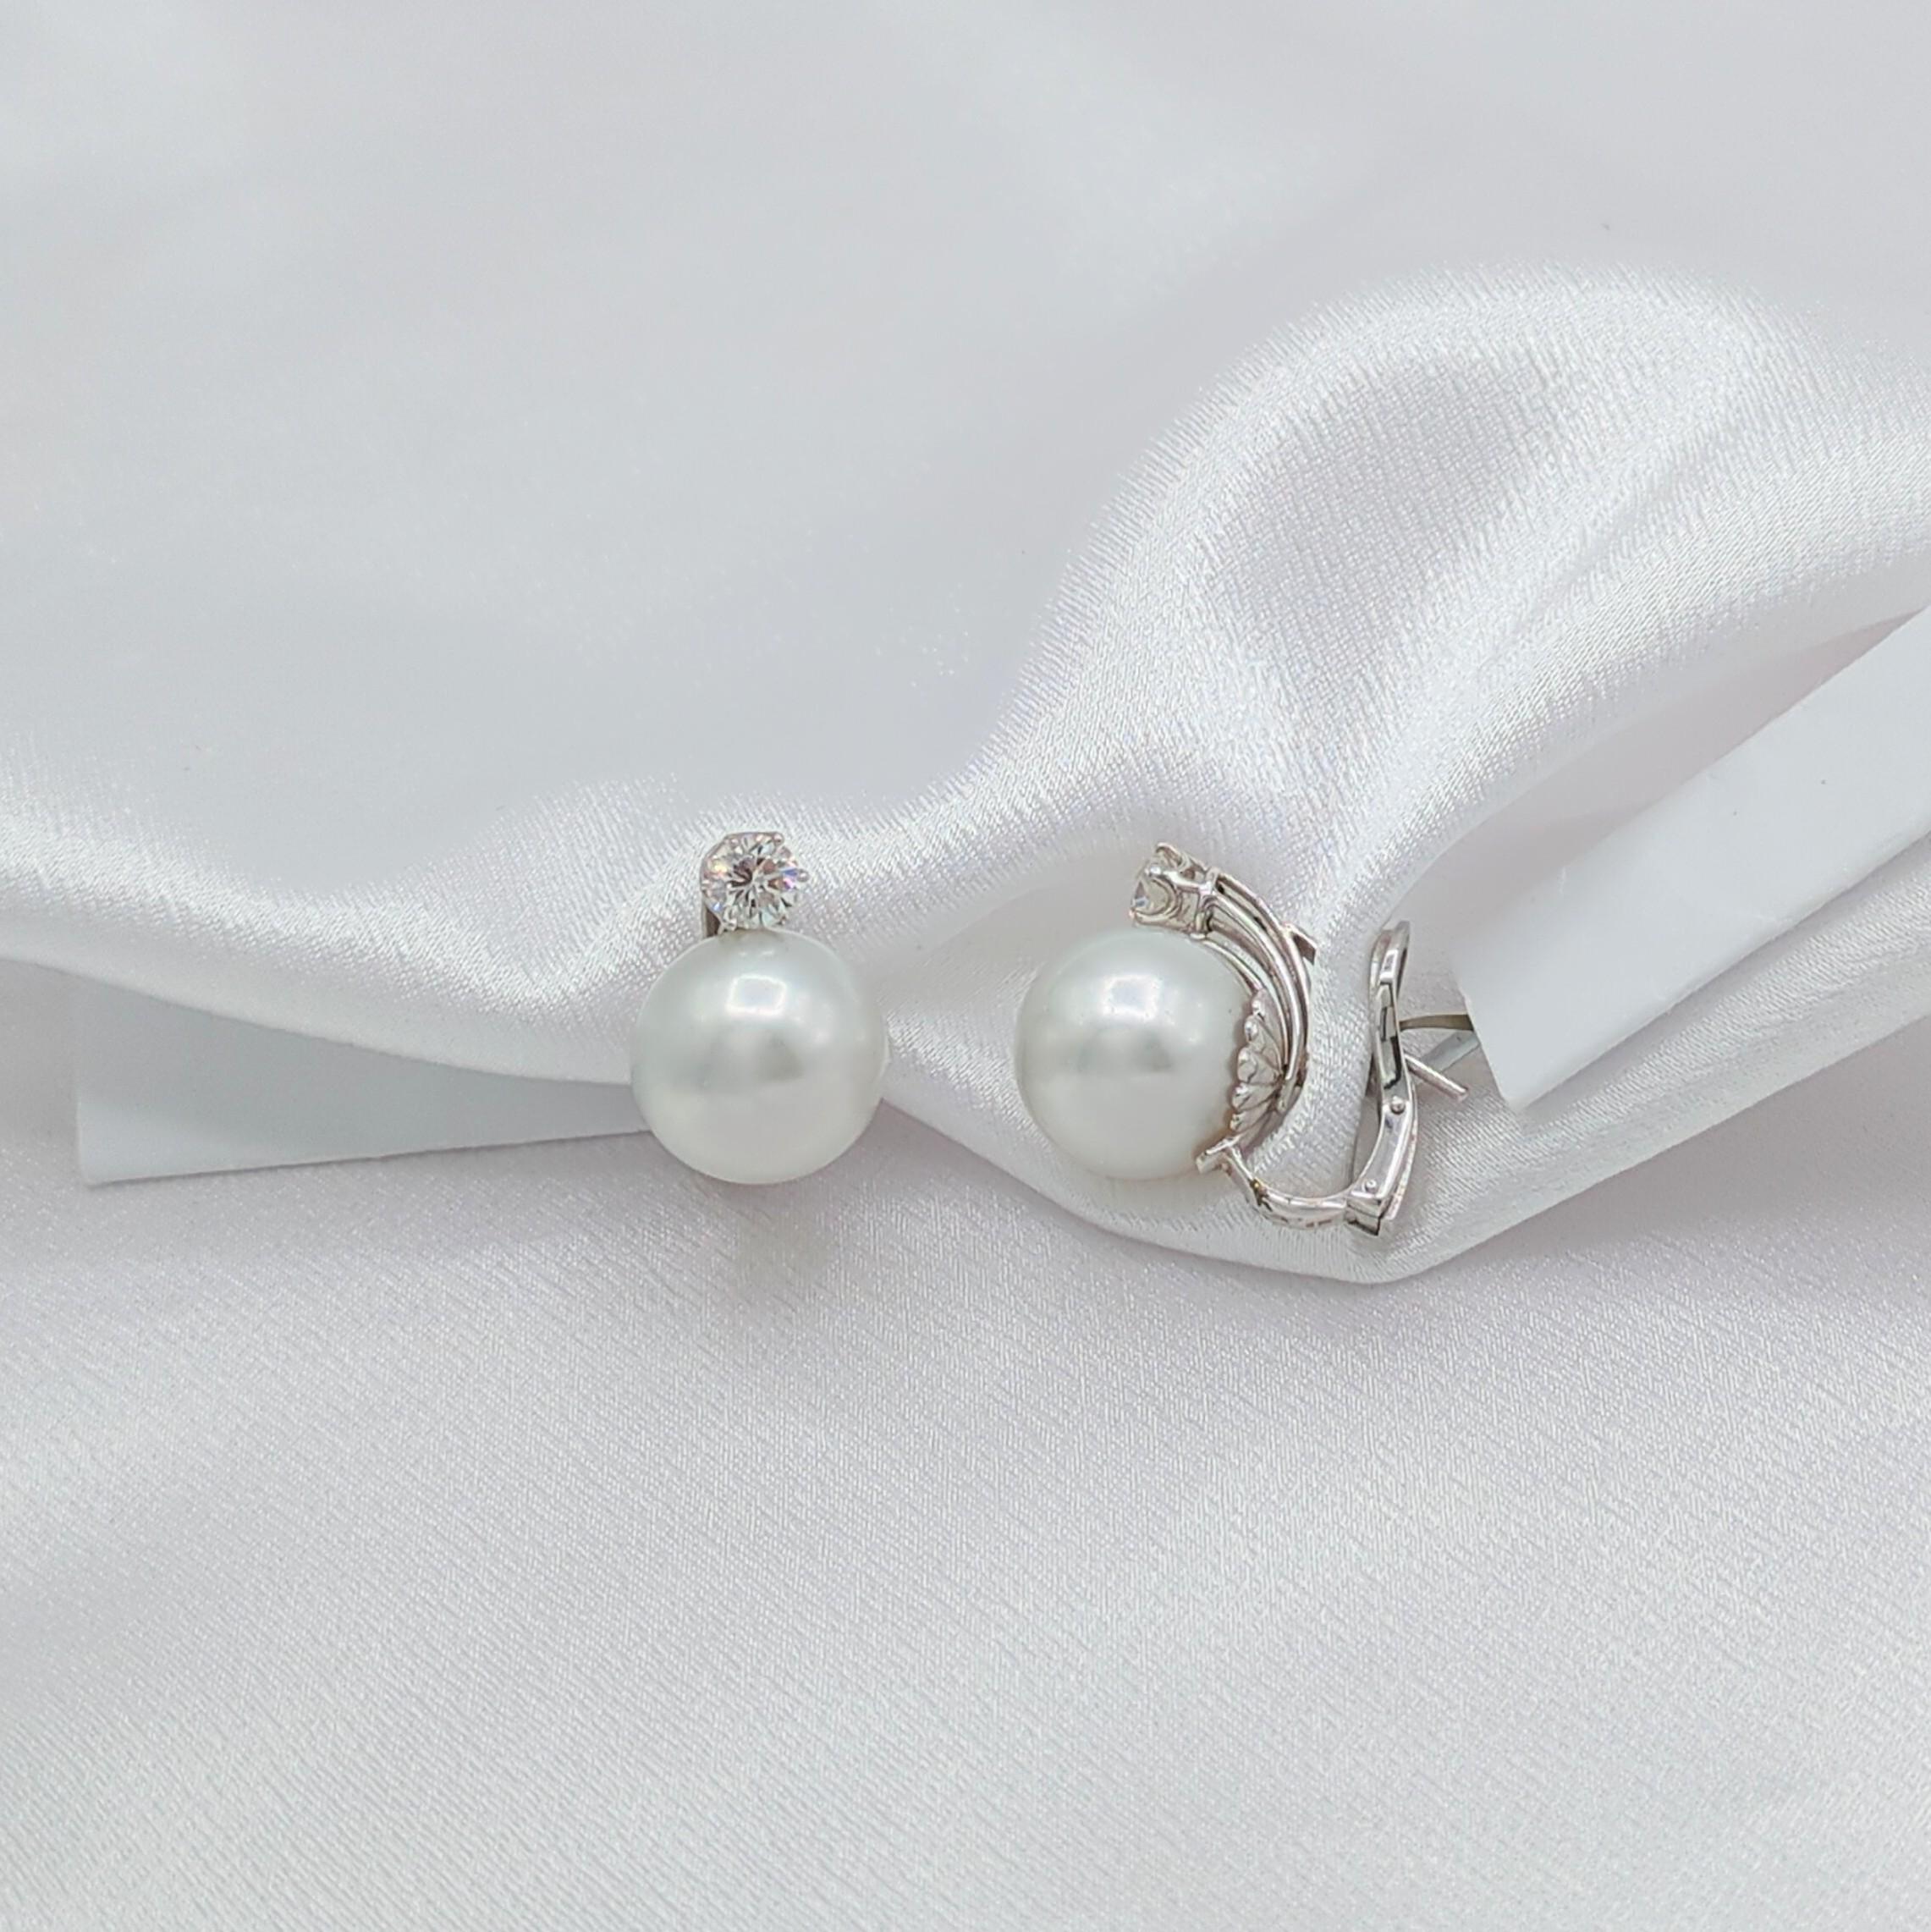 White South Sea Pearl Diamond Earrings in 18K White Gold For Sale 3